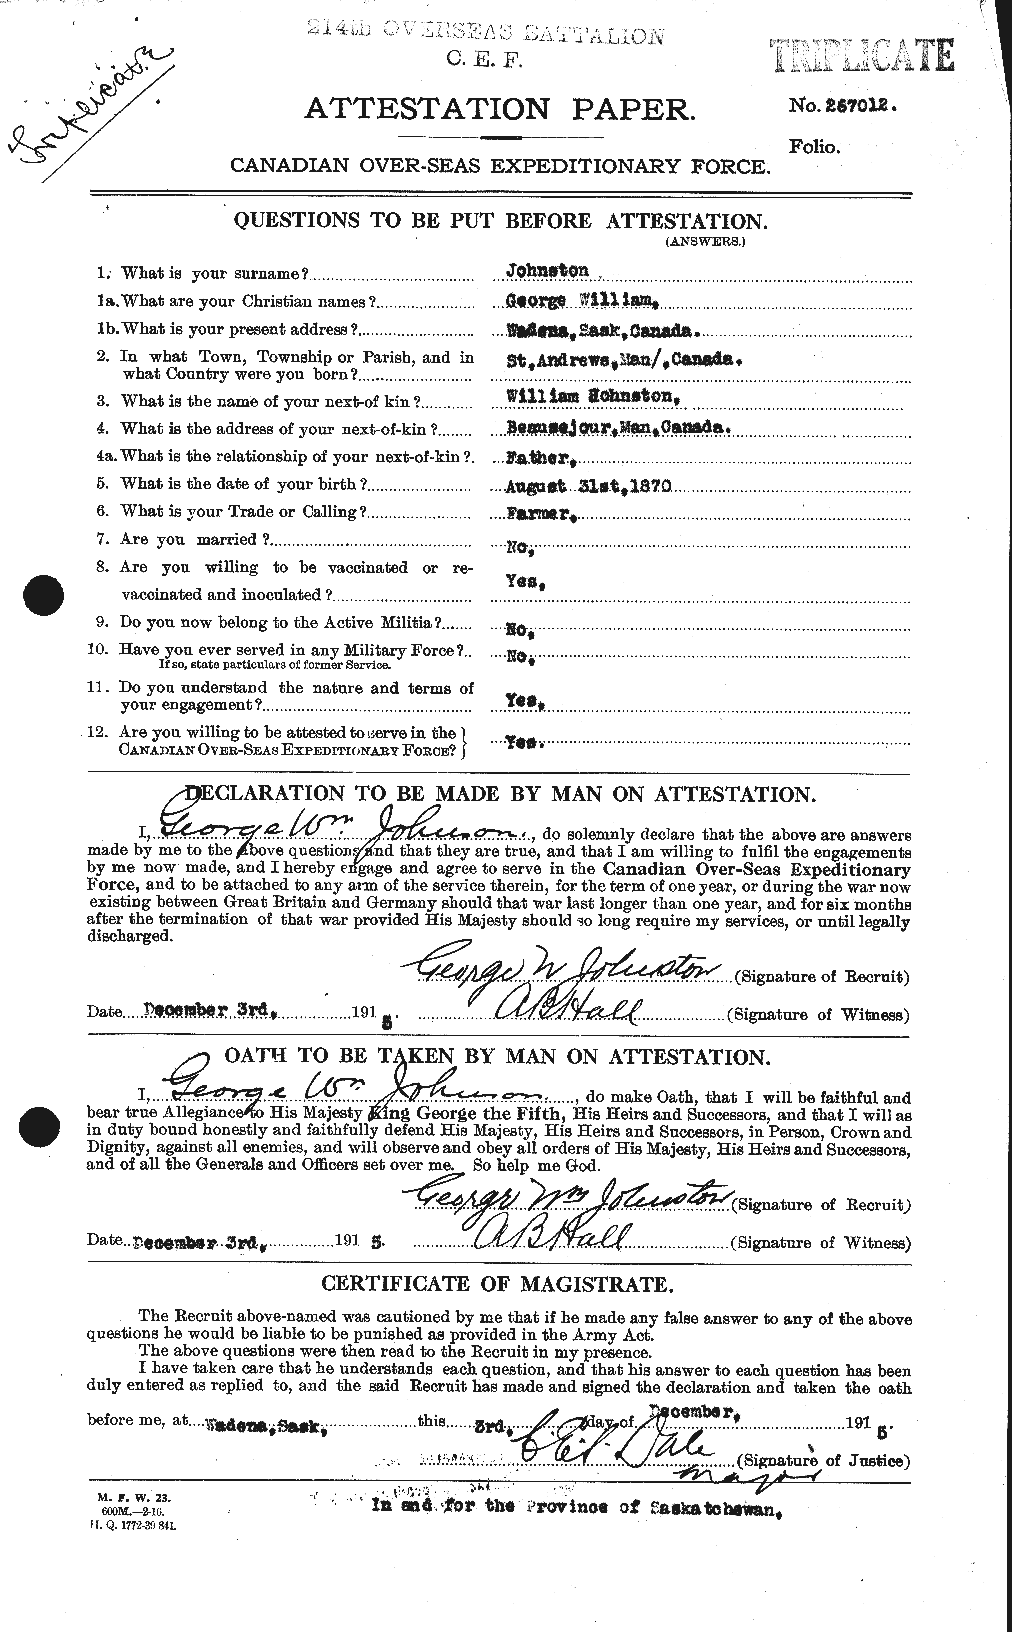 Personnel Records of the First World War - CEF 419454a